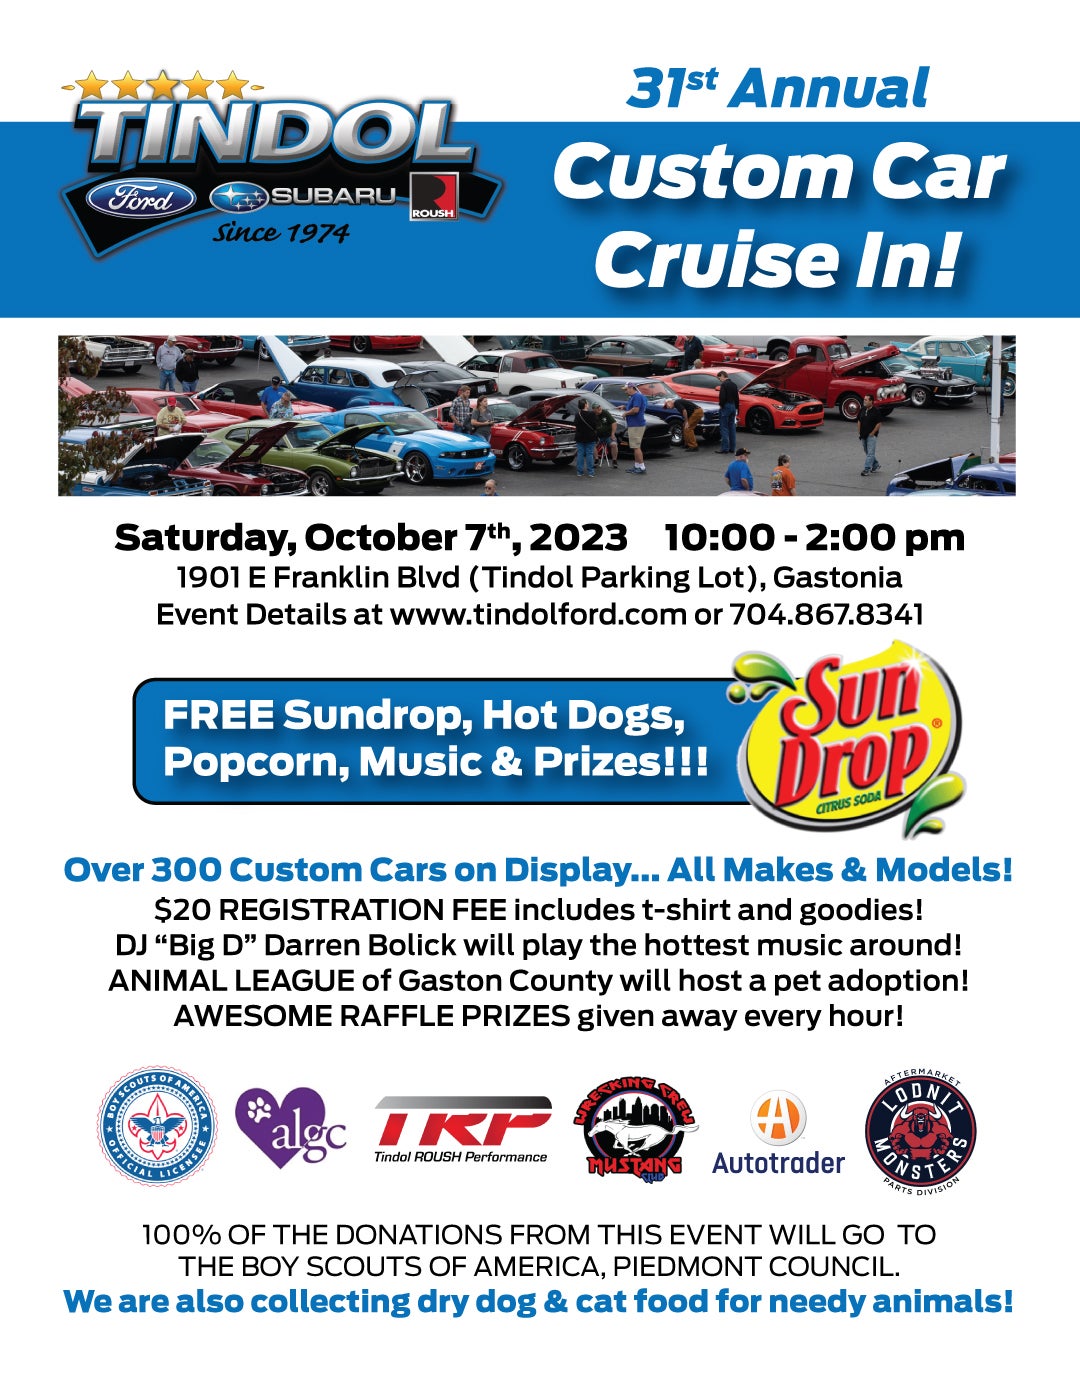 Save The Date for Tindol's 31st Annual Cruise Gastonia NC